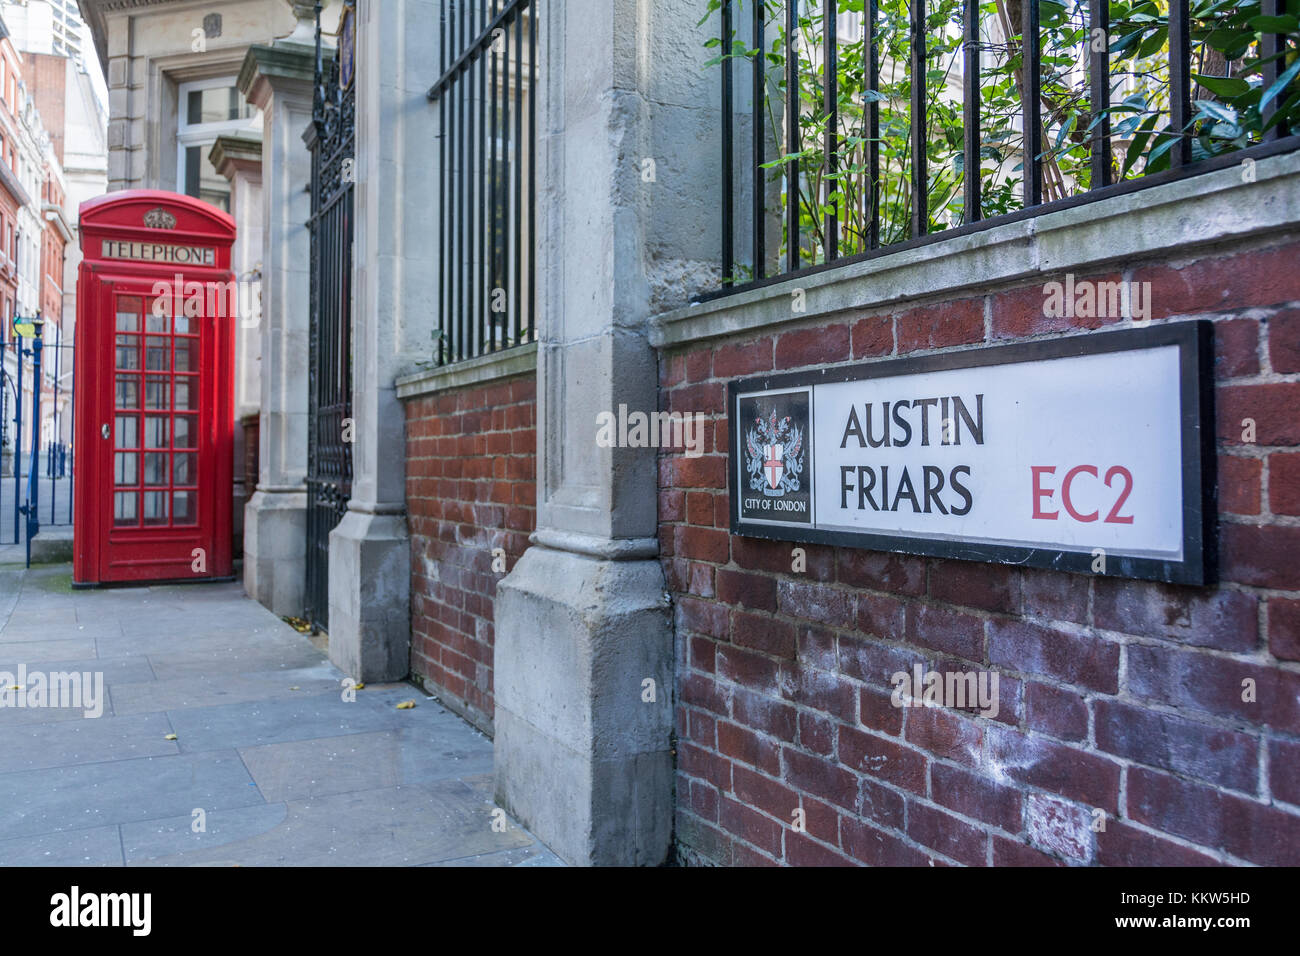 A red telephone box and street sign on Austin Friars in the City of London, EC2, UK Stock Photo